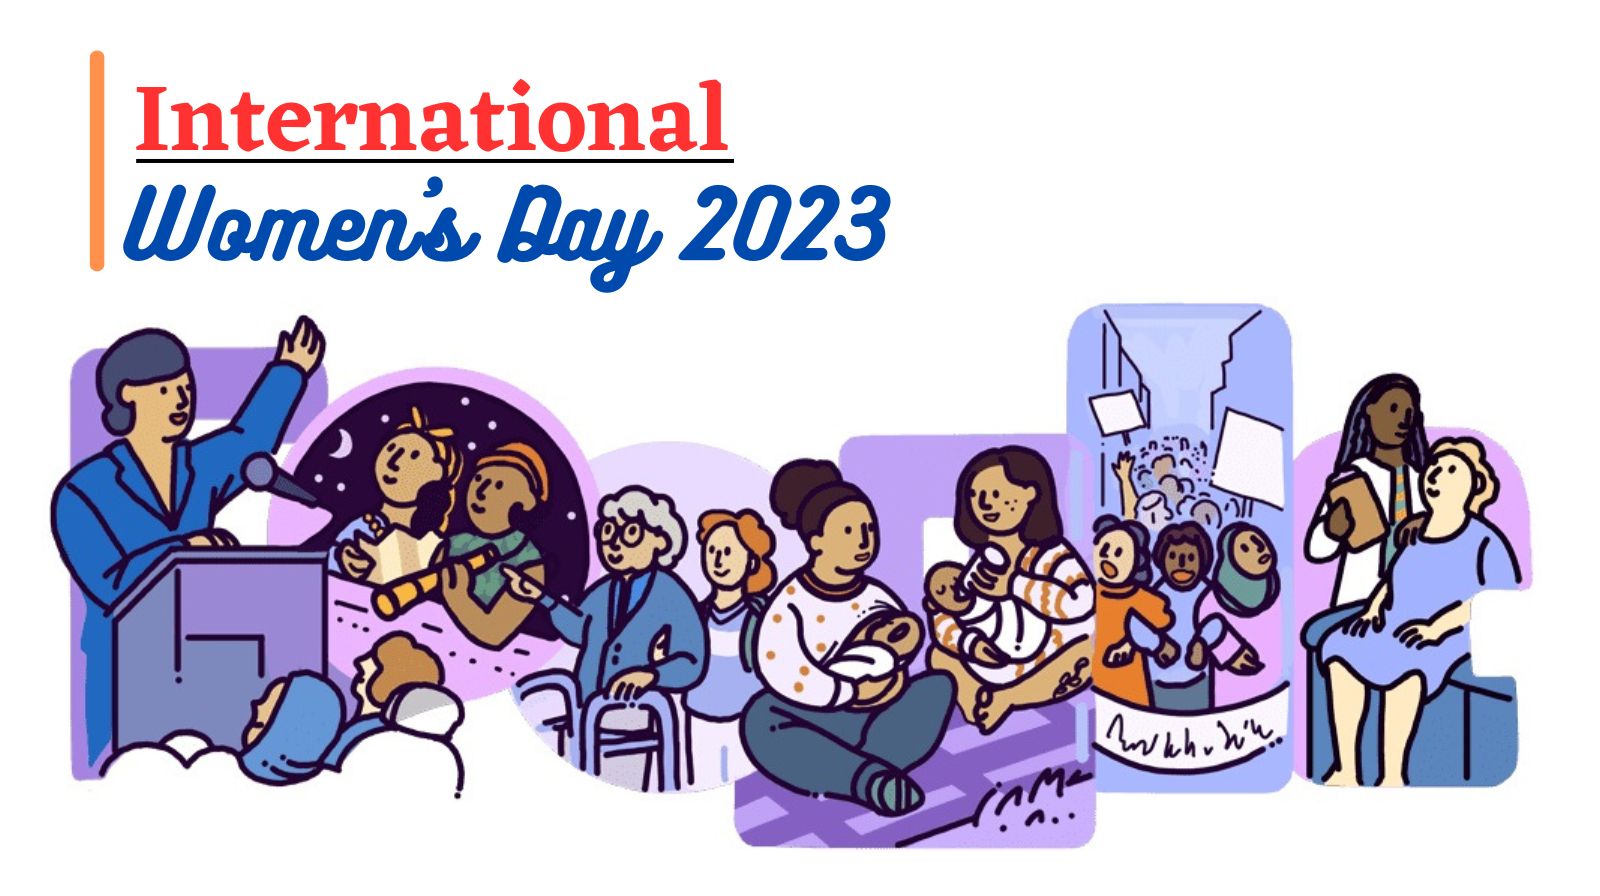 Google Celebrates International Women’s Day 2023 with a Doodle